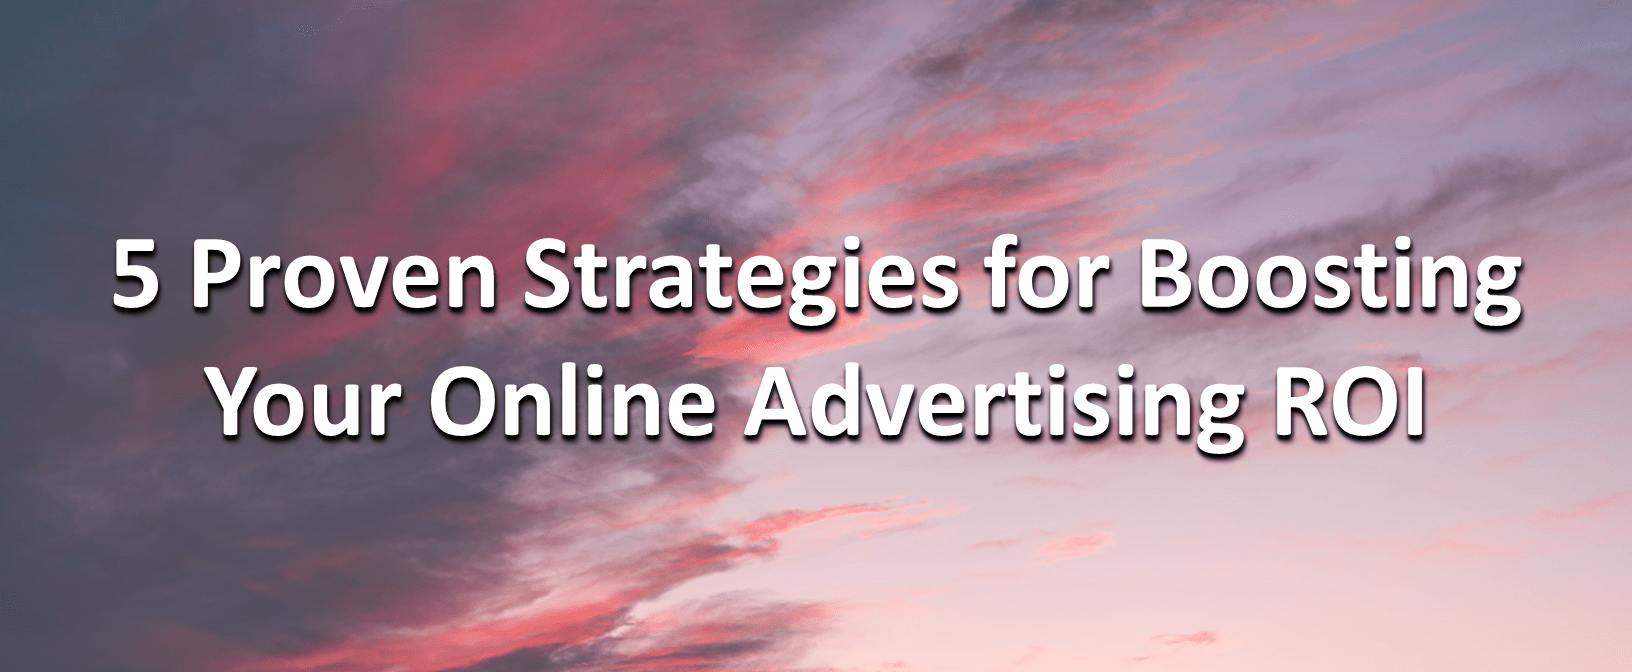 5 Proven Strategies for Boosting Your Online Advertising ROI